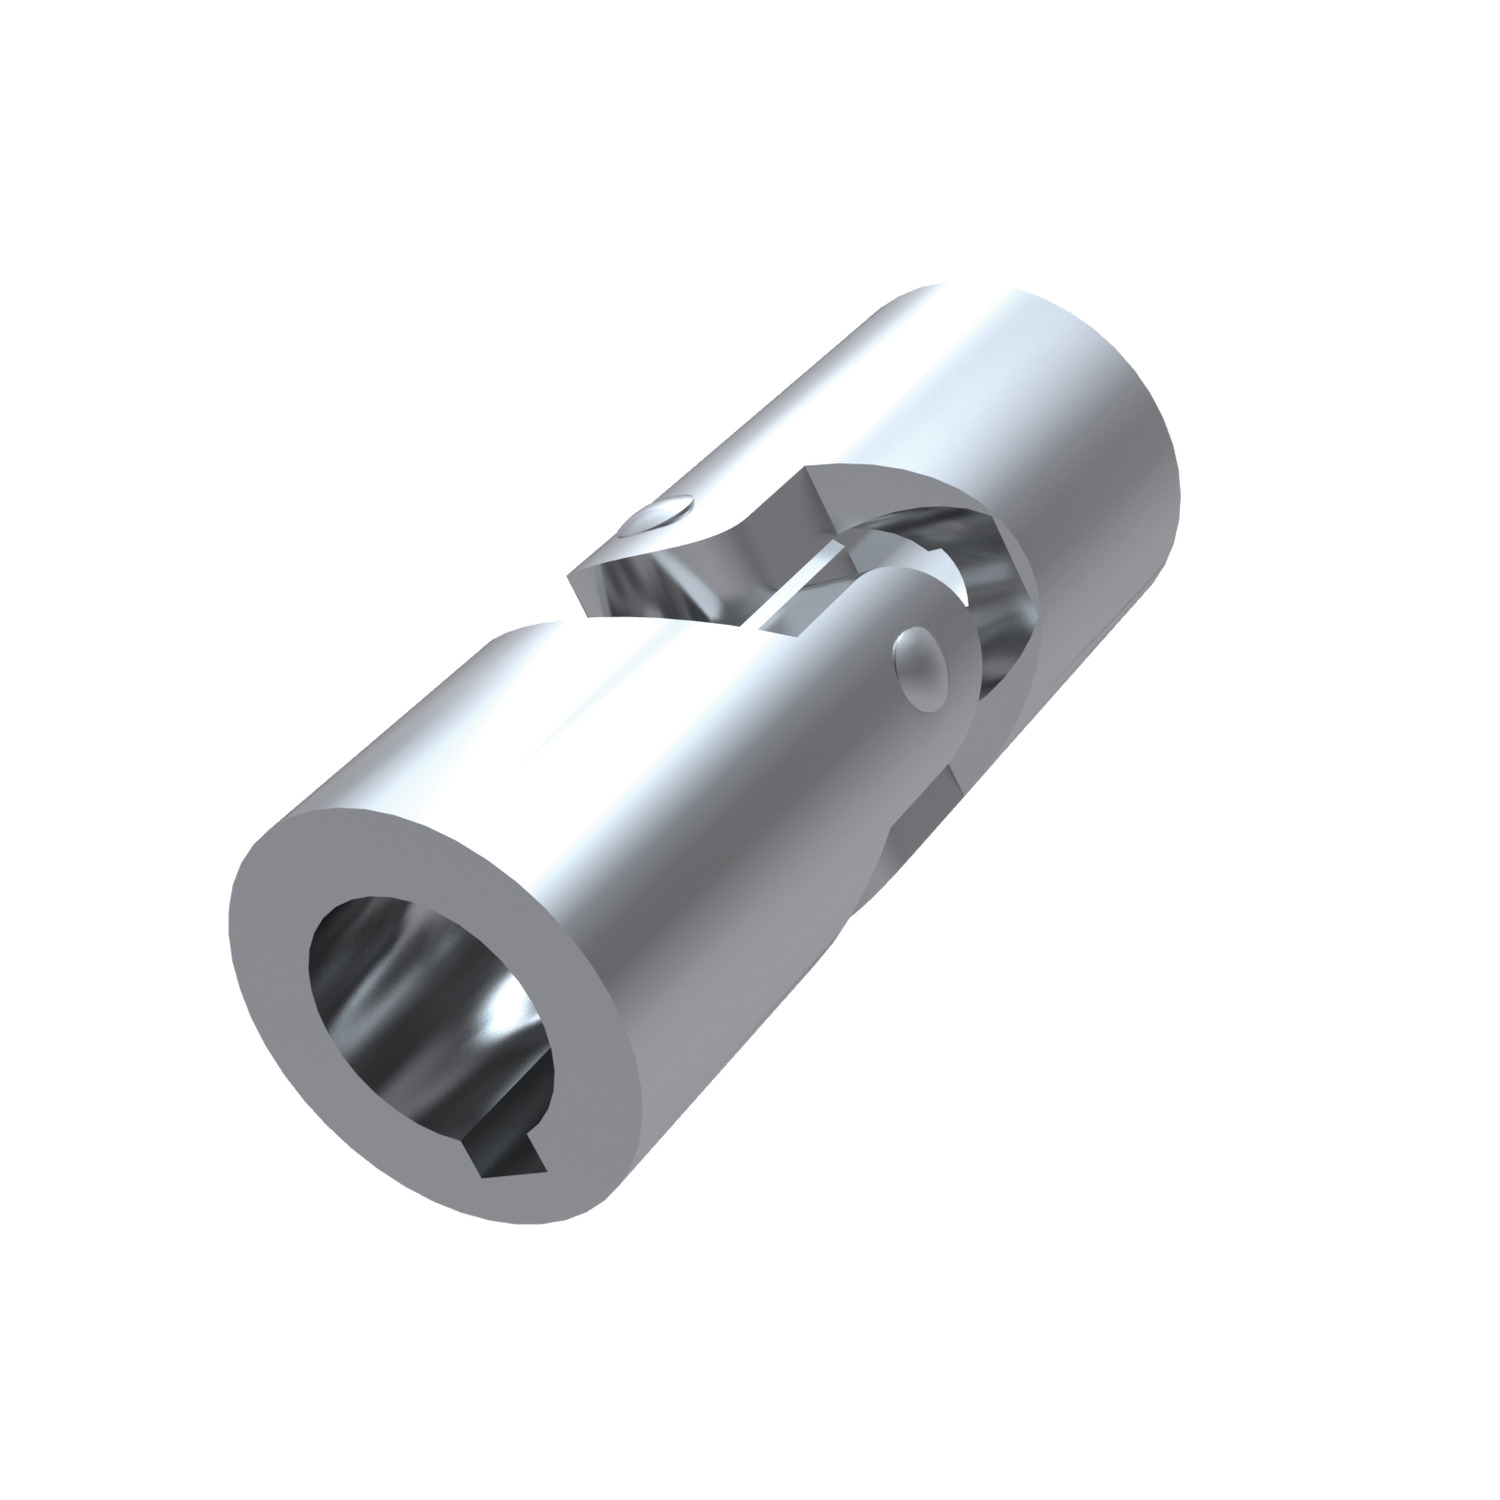 Single Universal Joint Steel universal joints are Used where shafts off-set towards each other. Manufactured to DIN 808/7551. Maximum bending angle of 45° per joint.